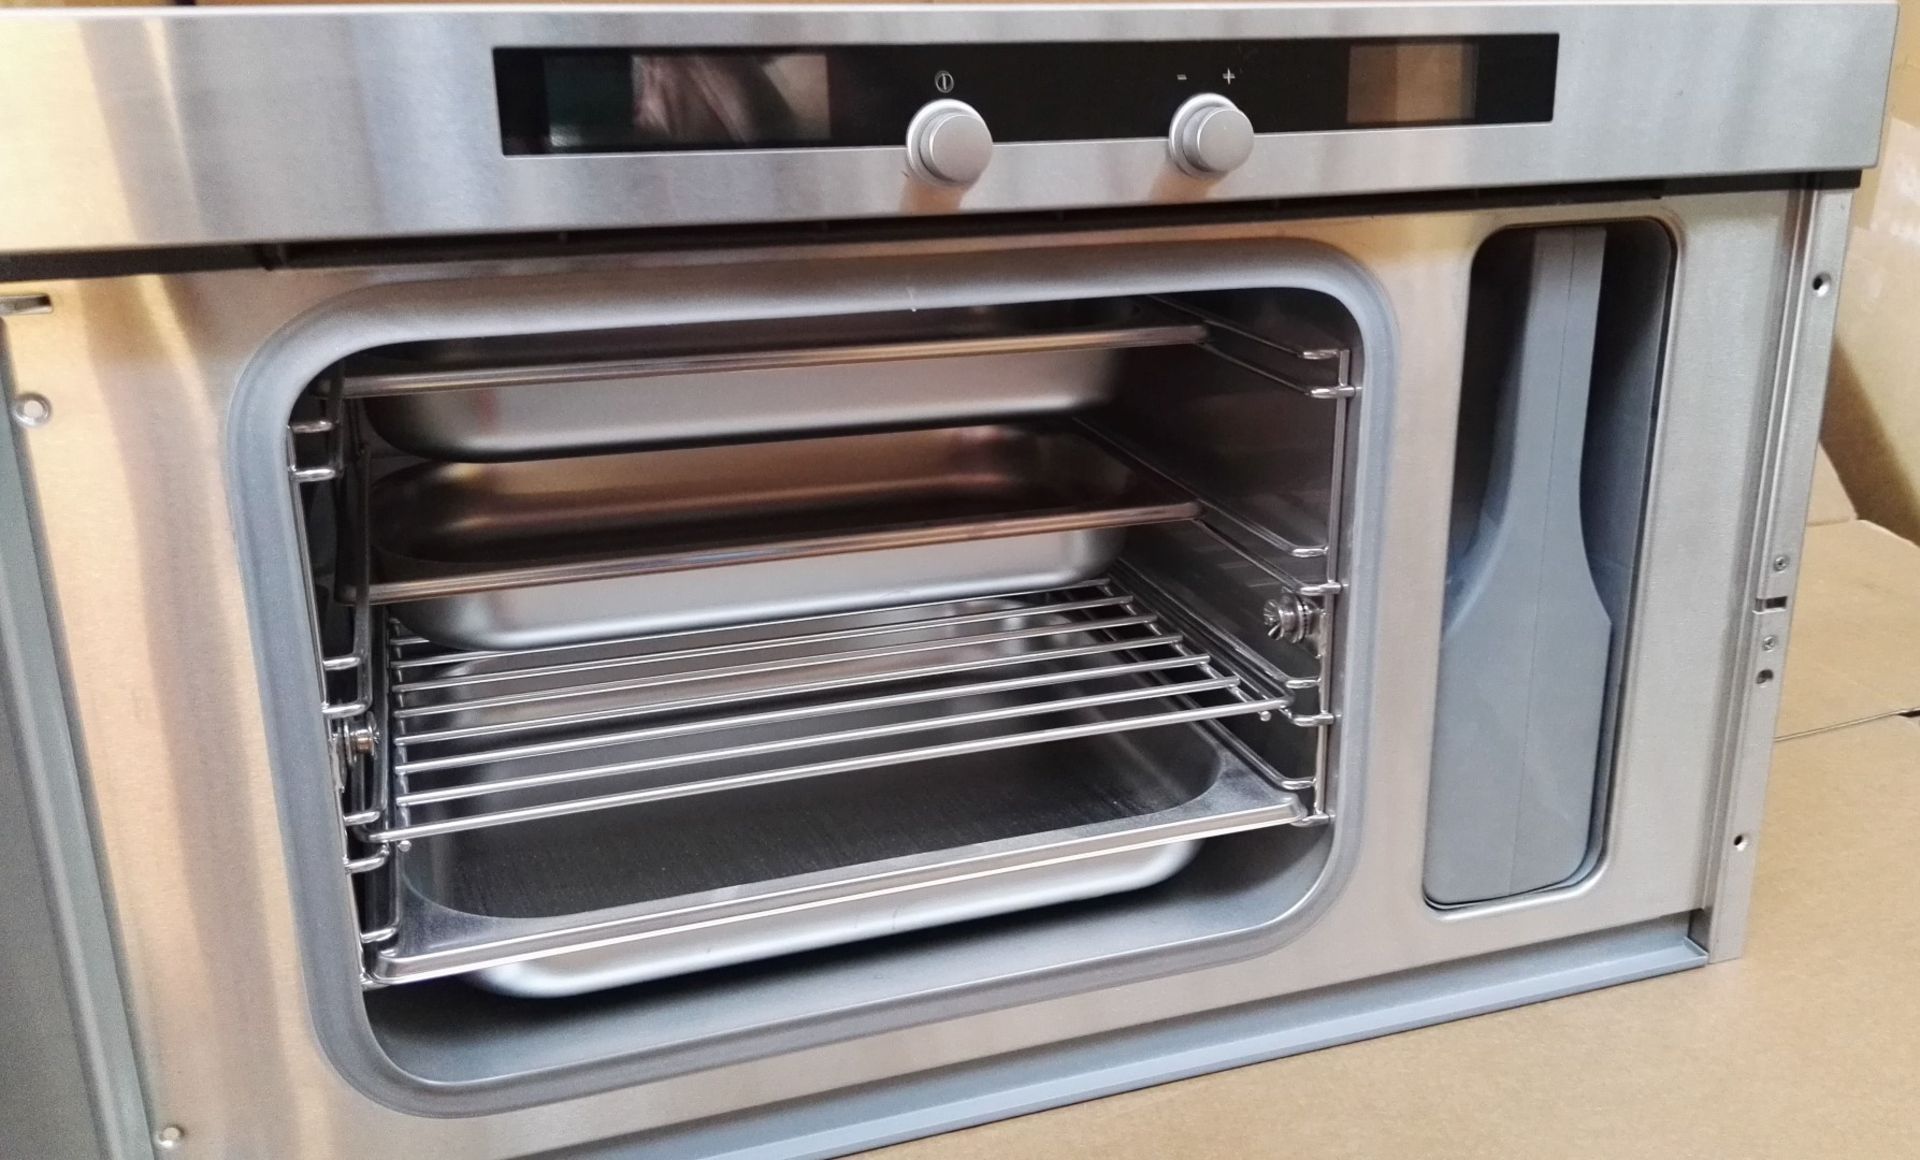 1 x Miele DG2661 60cm Wide Built-in Steam Oven - Unused Condition - CL283 - Location: Altrincham - Image 2 of 13